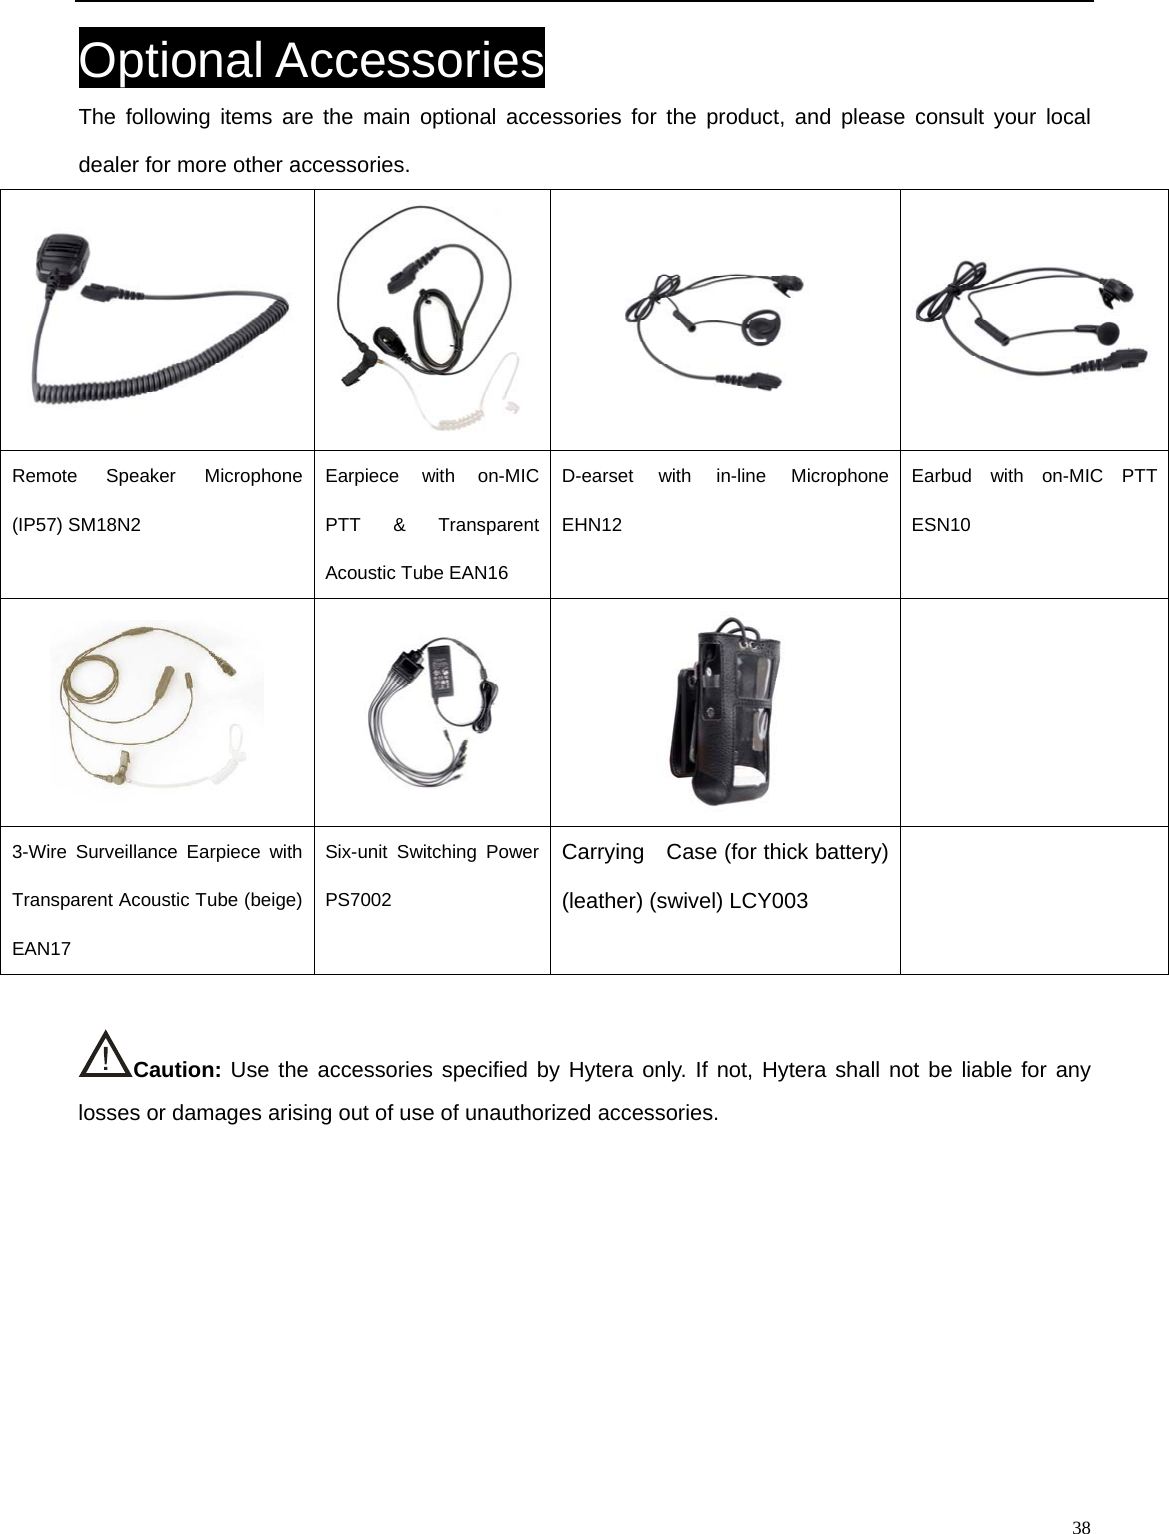                                                                                                            Optional Accessories The following items are the main optional accessories for the product, and please consult your local dealer for more other accessories.  Remote Speaker Microphone (IP57) SM18N2   Earpiece with on-MIC PTT &amp; Transparent Acoustic Tube EAN16   D-earset with in-line Microphone EHN12 Earbud with on-MIC PTT ESN10        Carrying    Case (for thick battery) (leather) (swivel) LCY003 3-Wire Surveillance Earpiece with Transparent Acoustic Tube (beige) EAN17 Six-unit Switching Power PS7002    Caution: Use the accessories specified by Hytera only. If not, Hytera shall not be liable for any losses or damages arising out of use of unauthorized accessories.               38